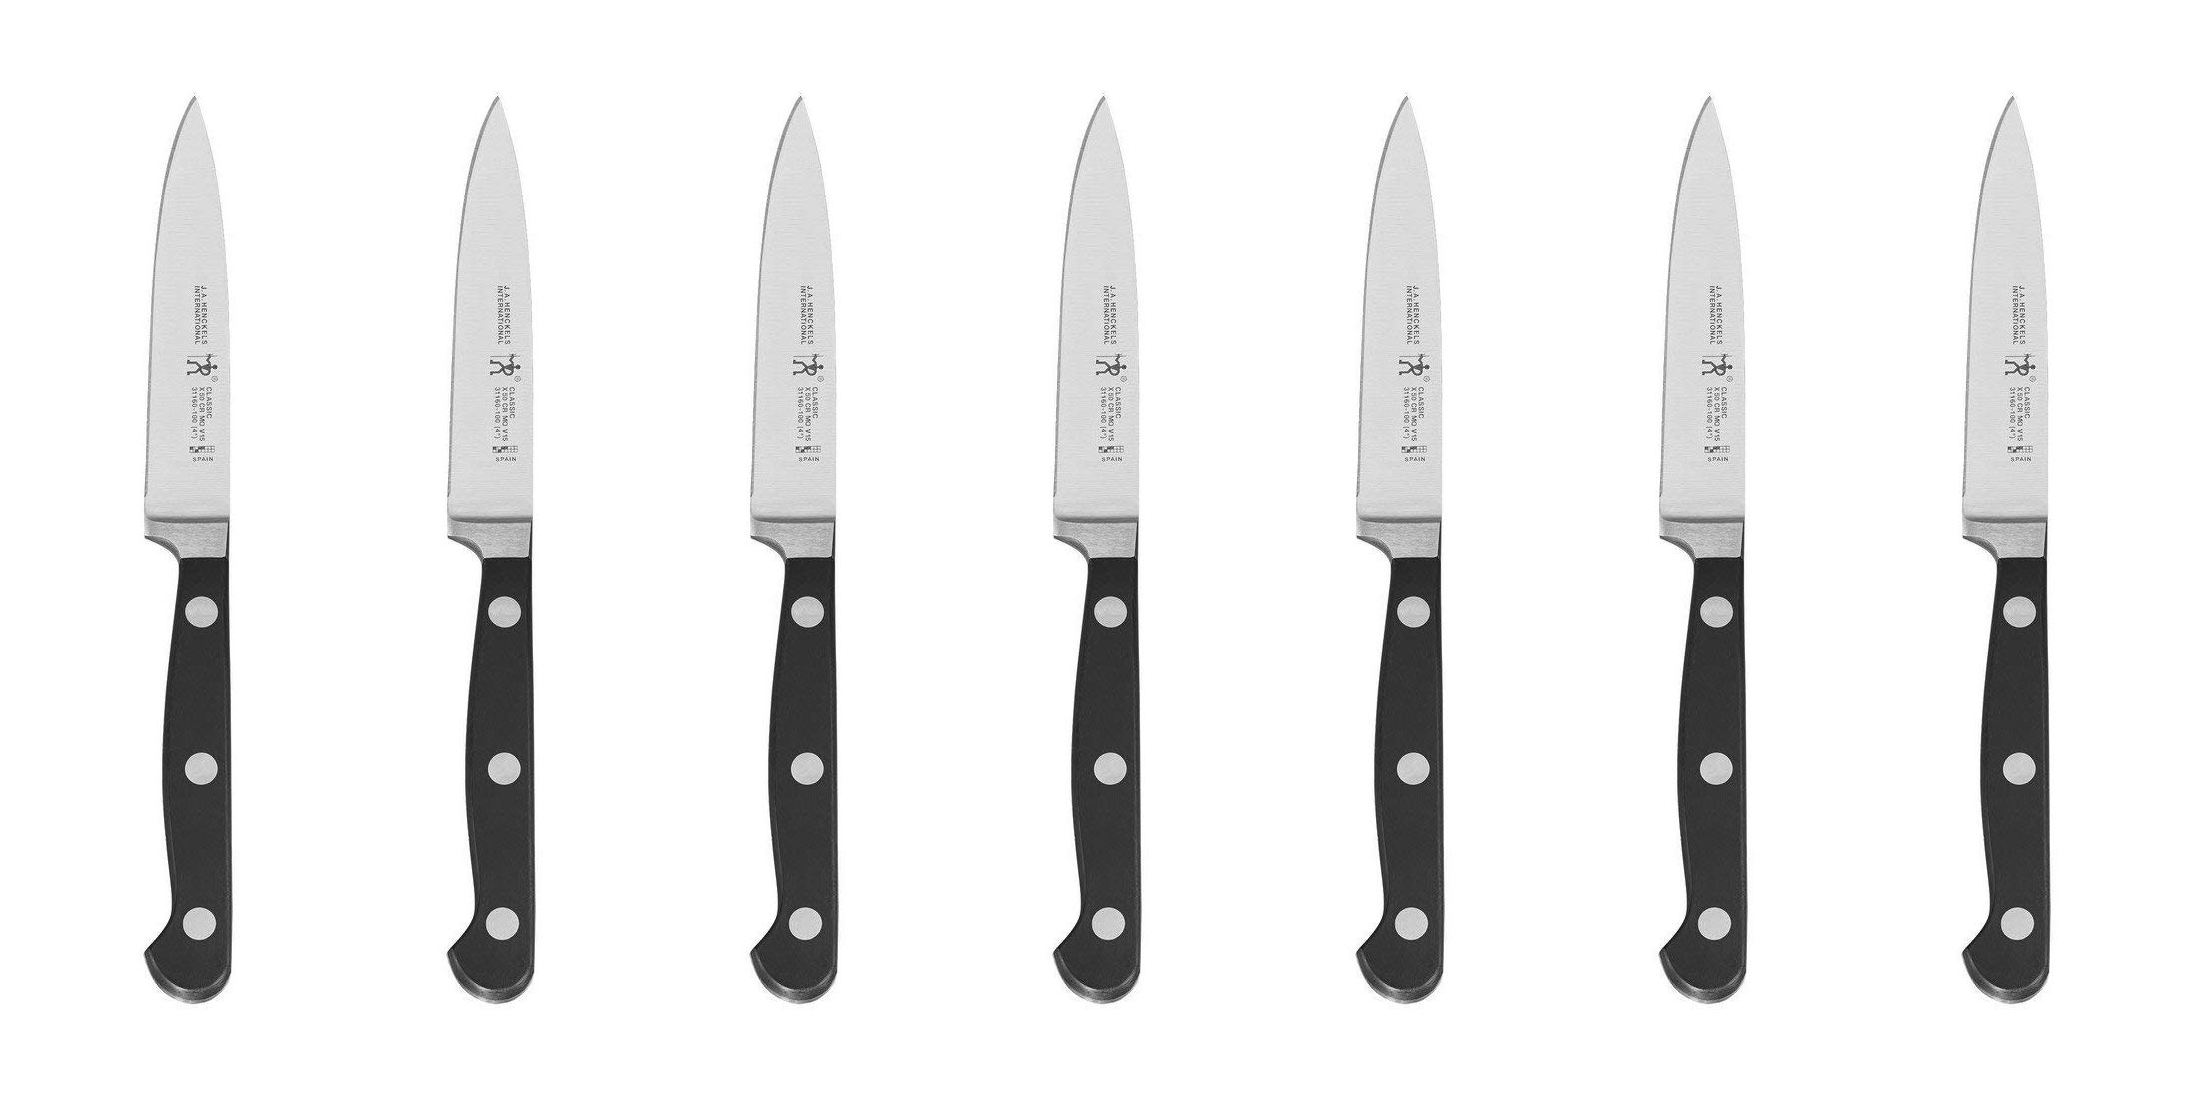 https://9to5toys.com/wp-content/uploads/sites/5/2019/04/J.A.-Henckels-International-4-Inch-Paring-Utility-Knife.png